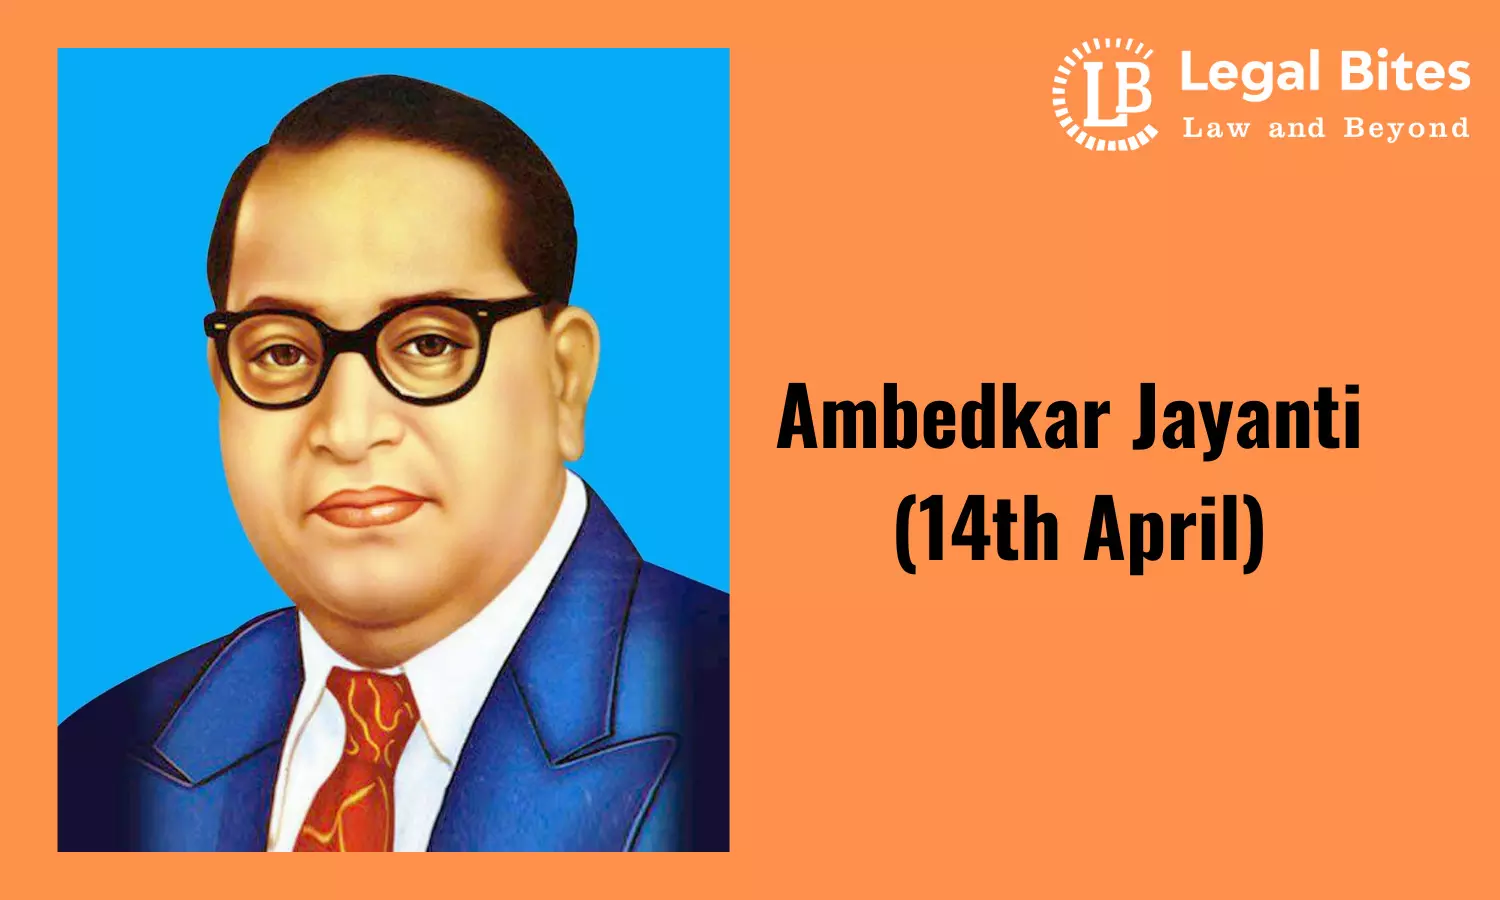 Ambedkar Jayanti (14th April): All You Need to Know